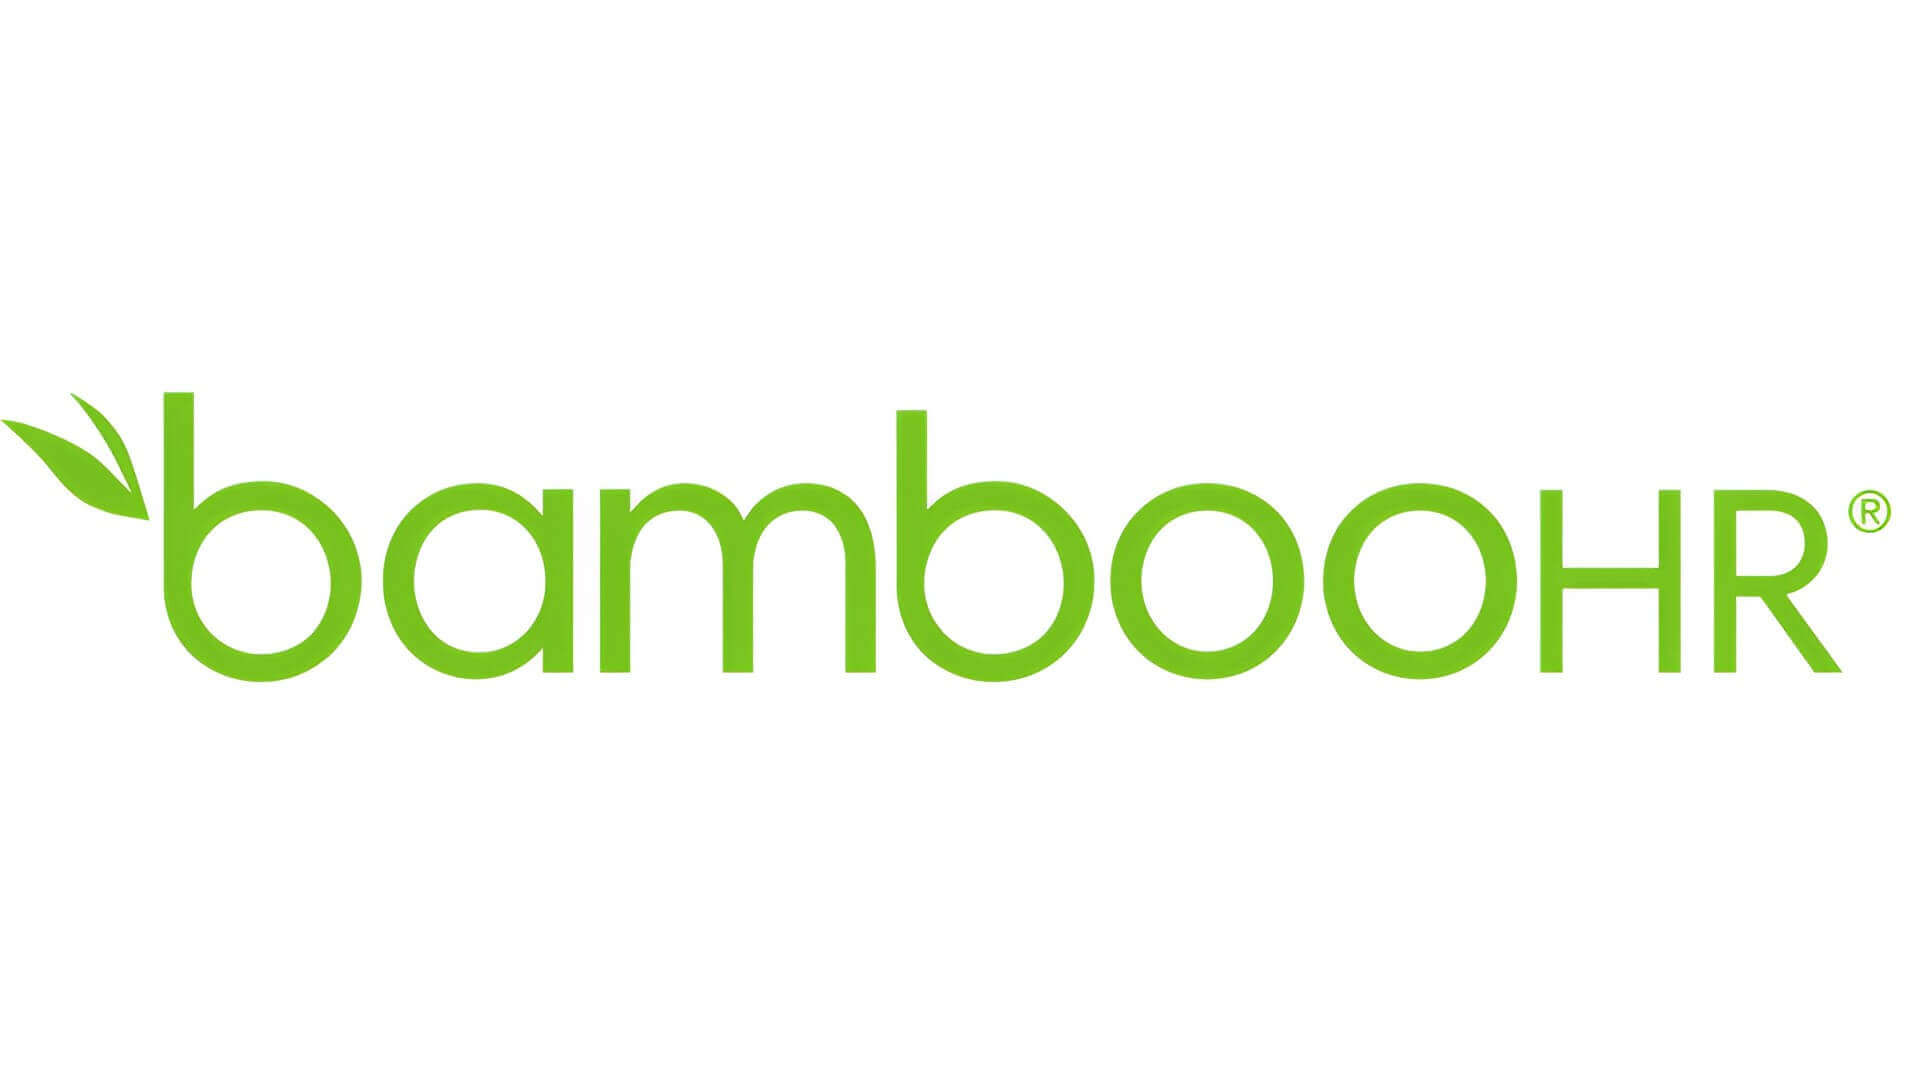 HR Software Solutions For Managing Employee Performance: BambooHR